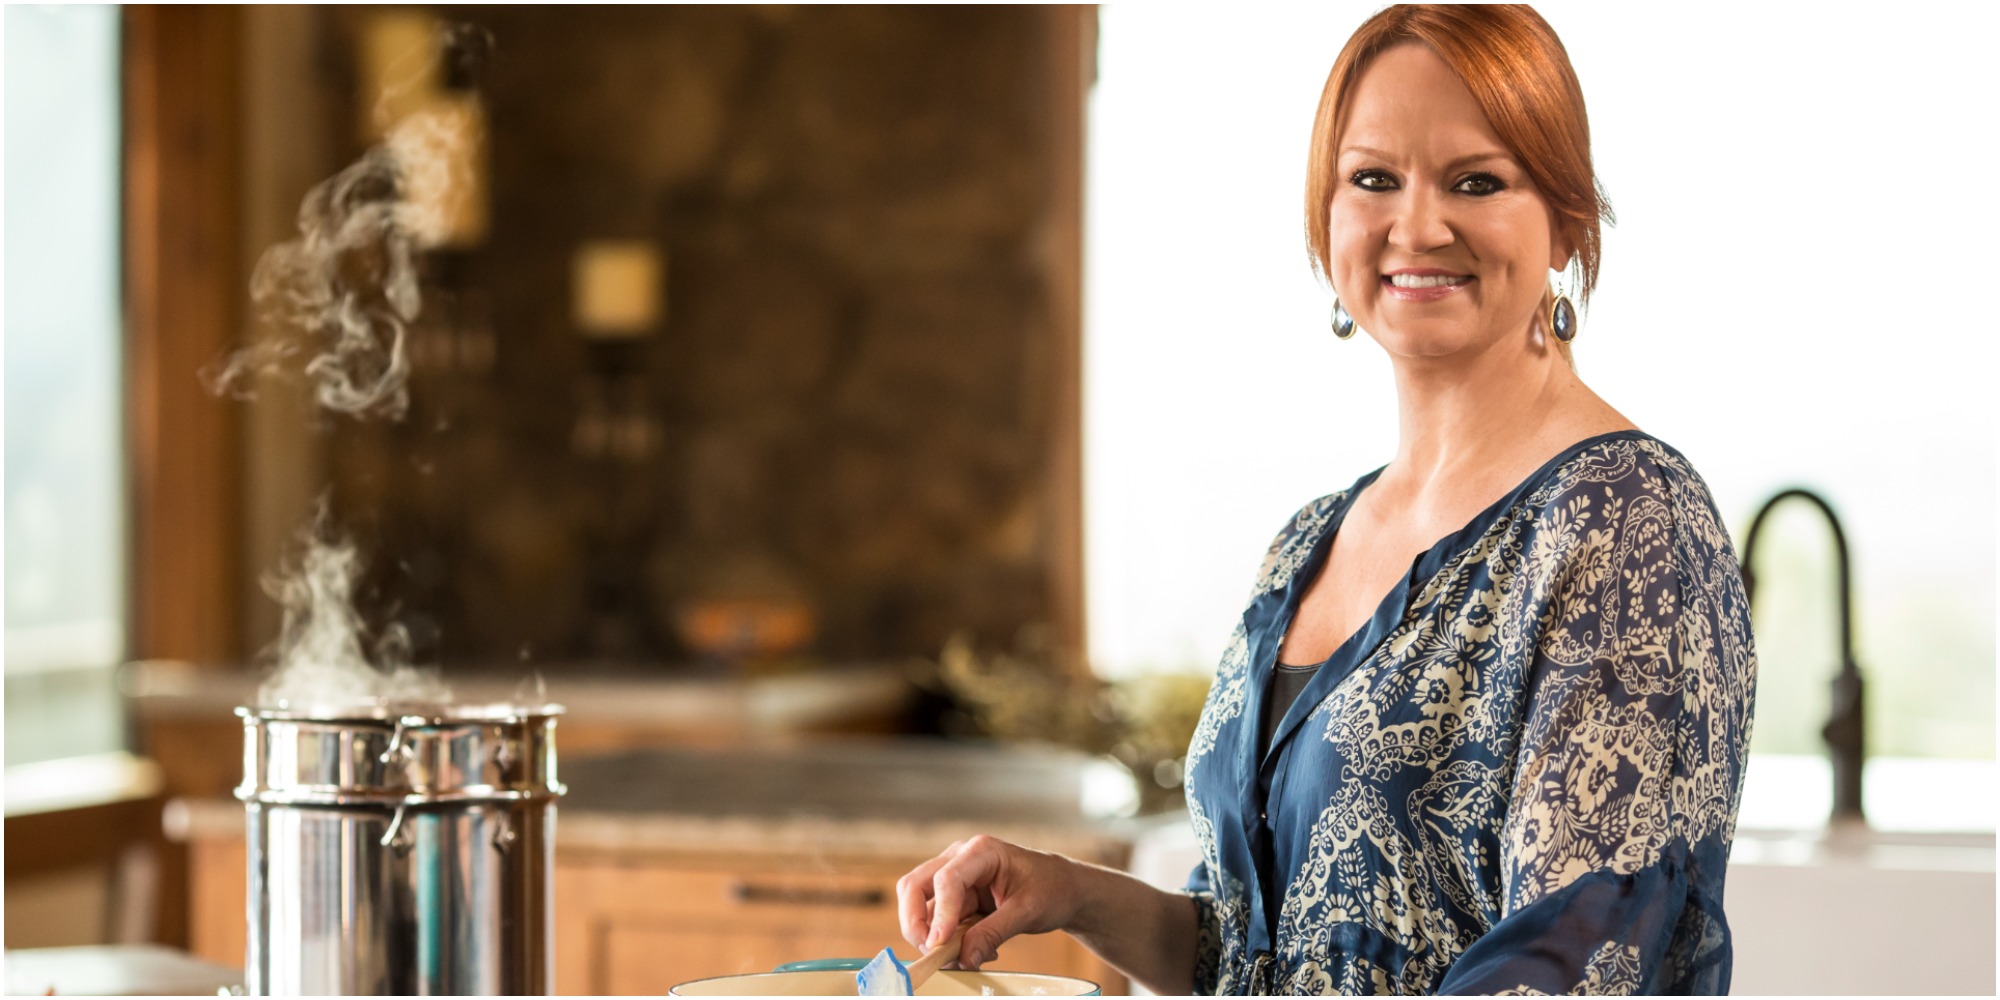 ‘The Pioneer Woman’: Ree Drummond’s Shepherd’s Pie Is One Pan, Budget-Friendly ‘Mashed Potato Delight’